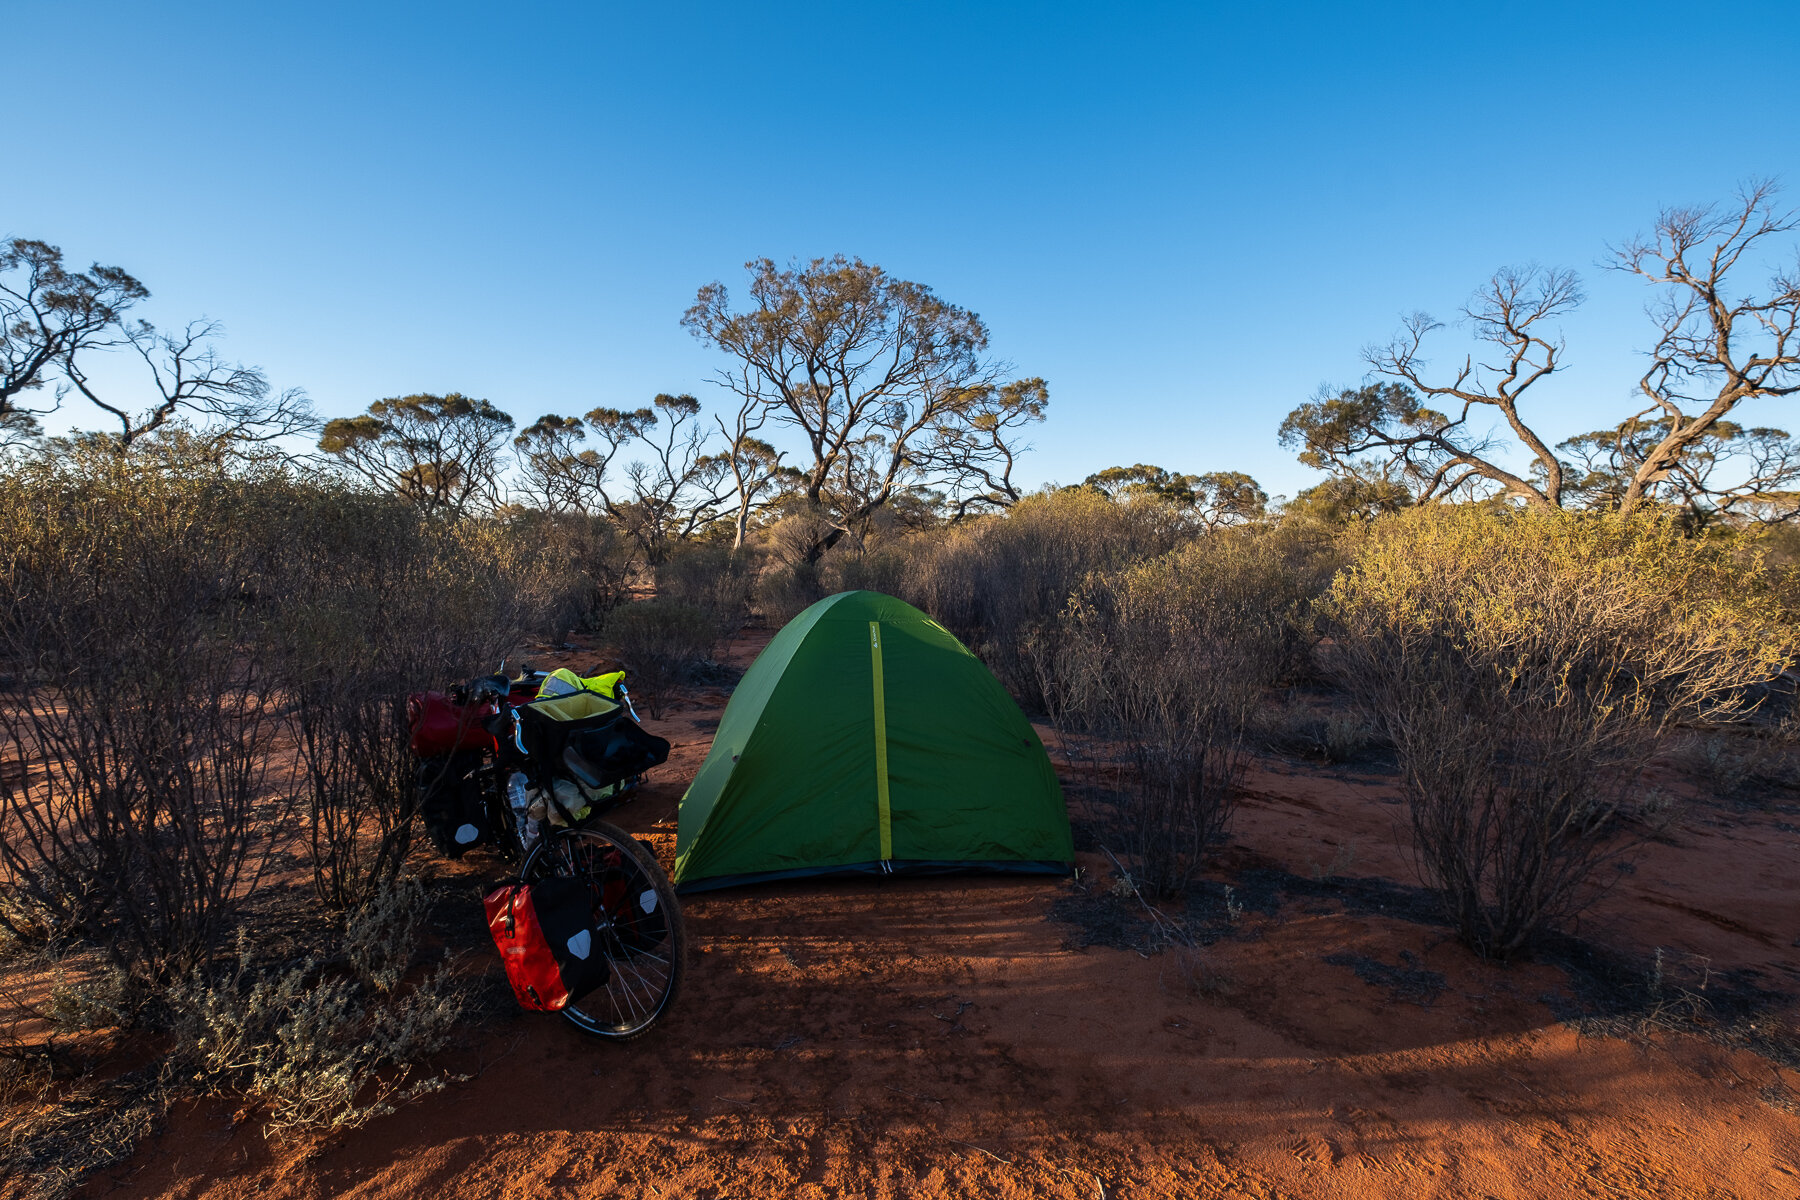  As someone who loves to explore the Great Outdoors, I can say that wild camping in Australia is an unforgettable experience. The freedom to pitch your tent wherever you want is a remarkable feeling. You can choose to camp by the beach, in the bush, 